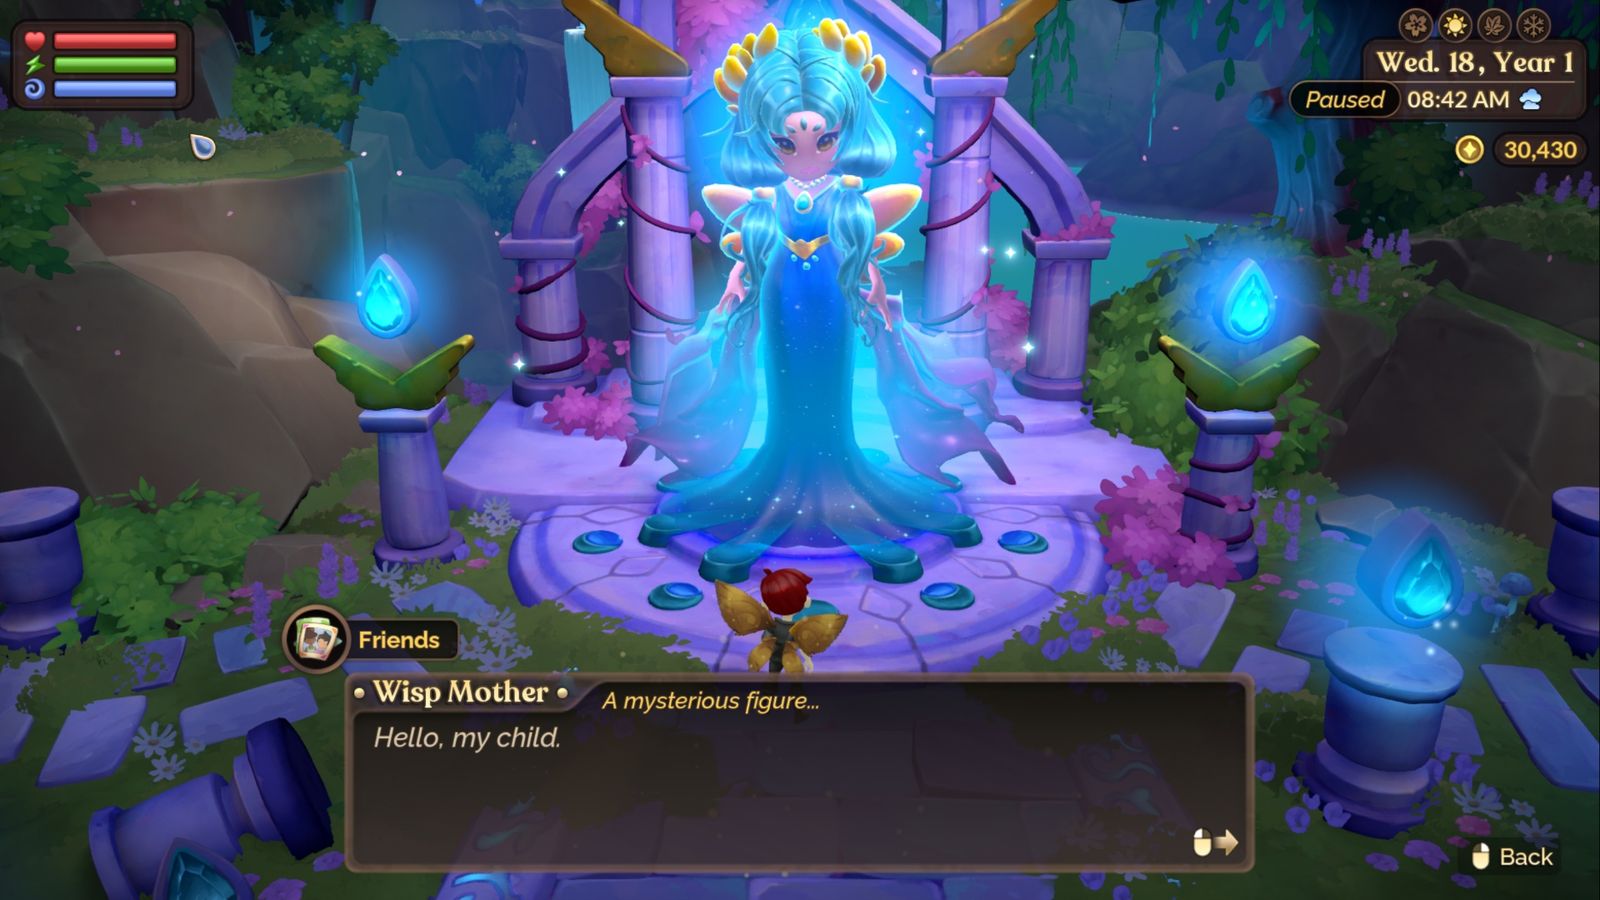 Fae Farm character standing near the wisp mother. She says 'Hello, my child'.